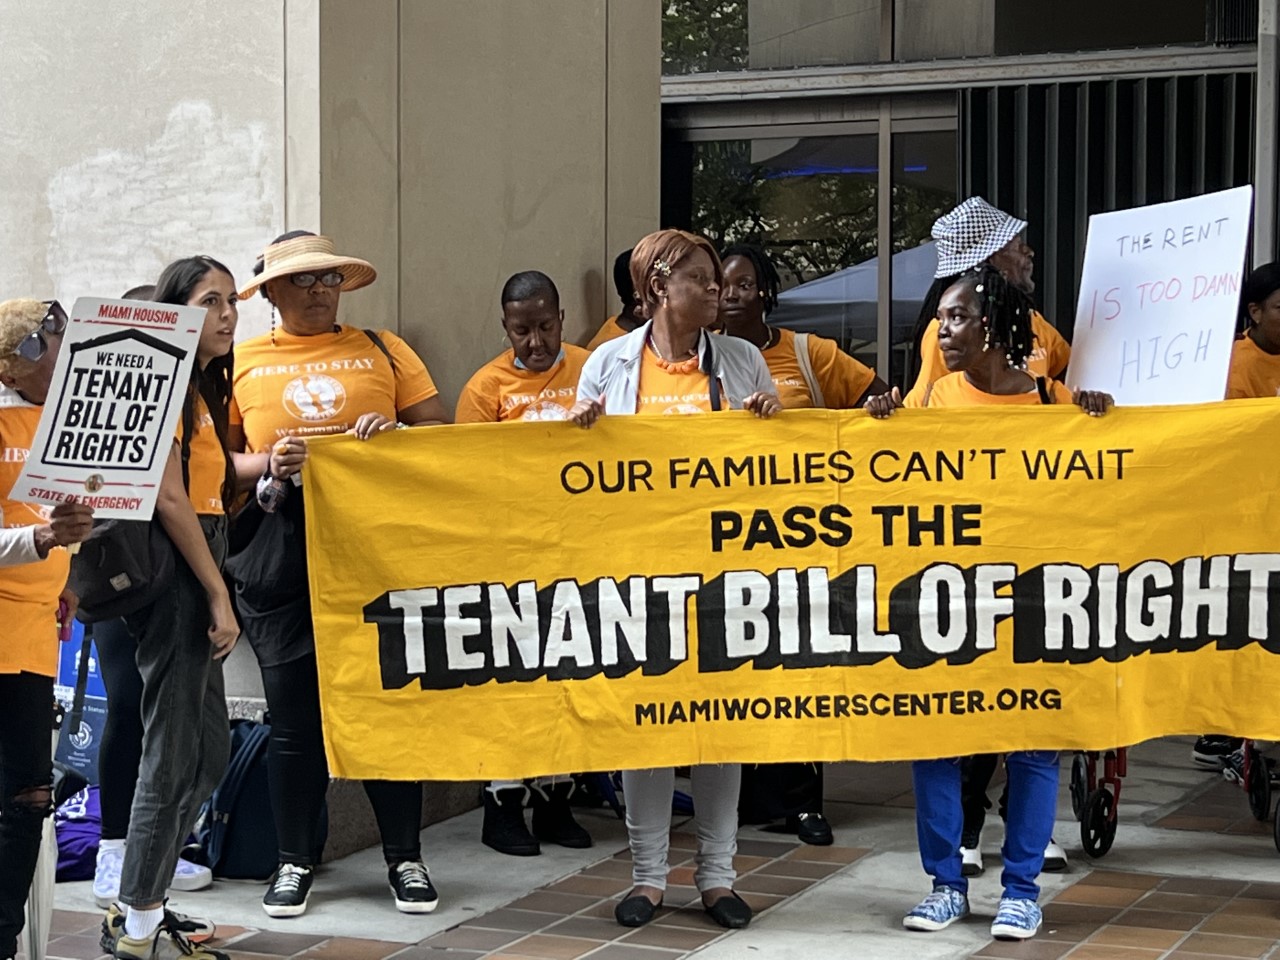 Fed Up With Rent Increases, Miami-Dade Protesters Want Tenant’s Bill Of Rights